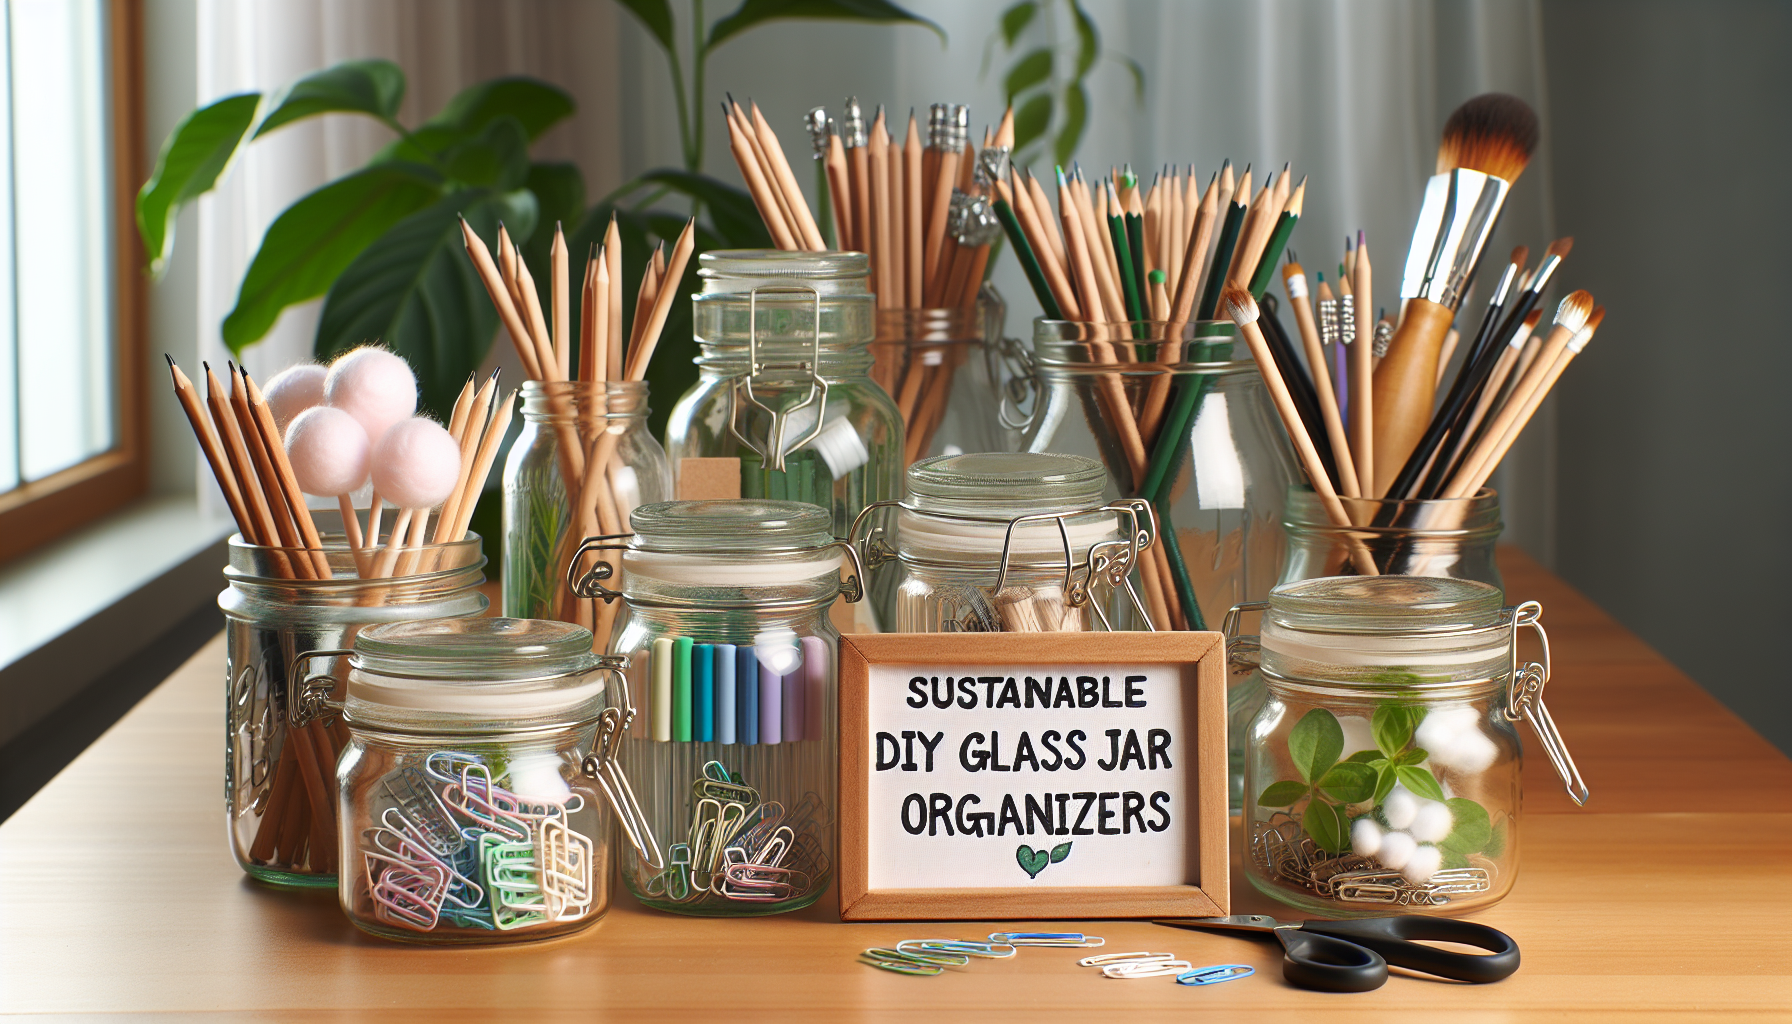 Revamp your space with eco-friendly DIY glass jar organizers